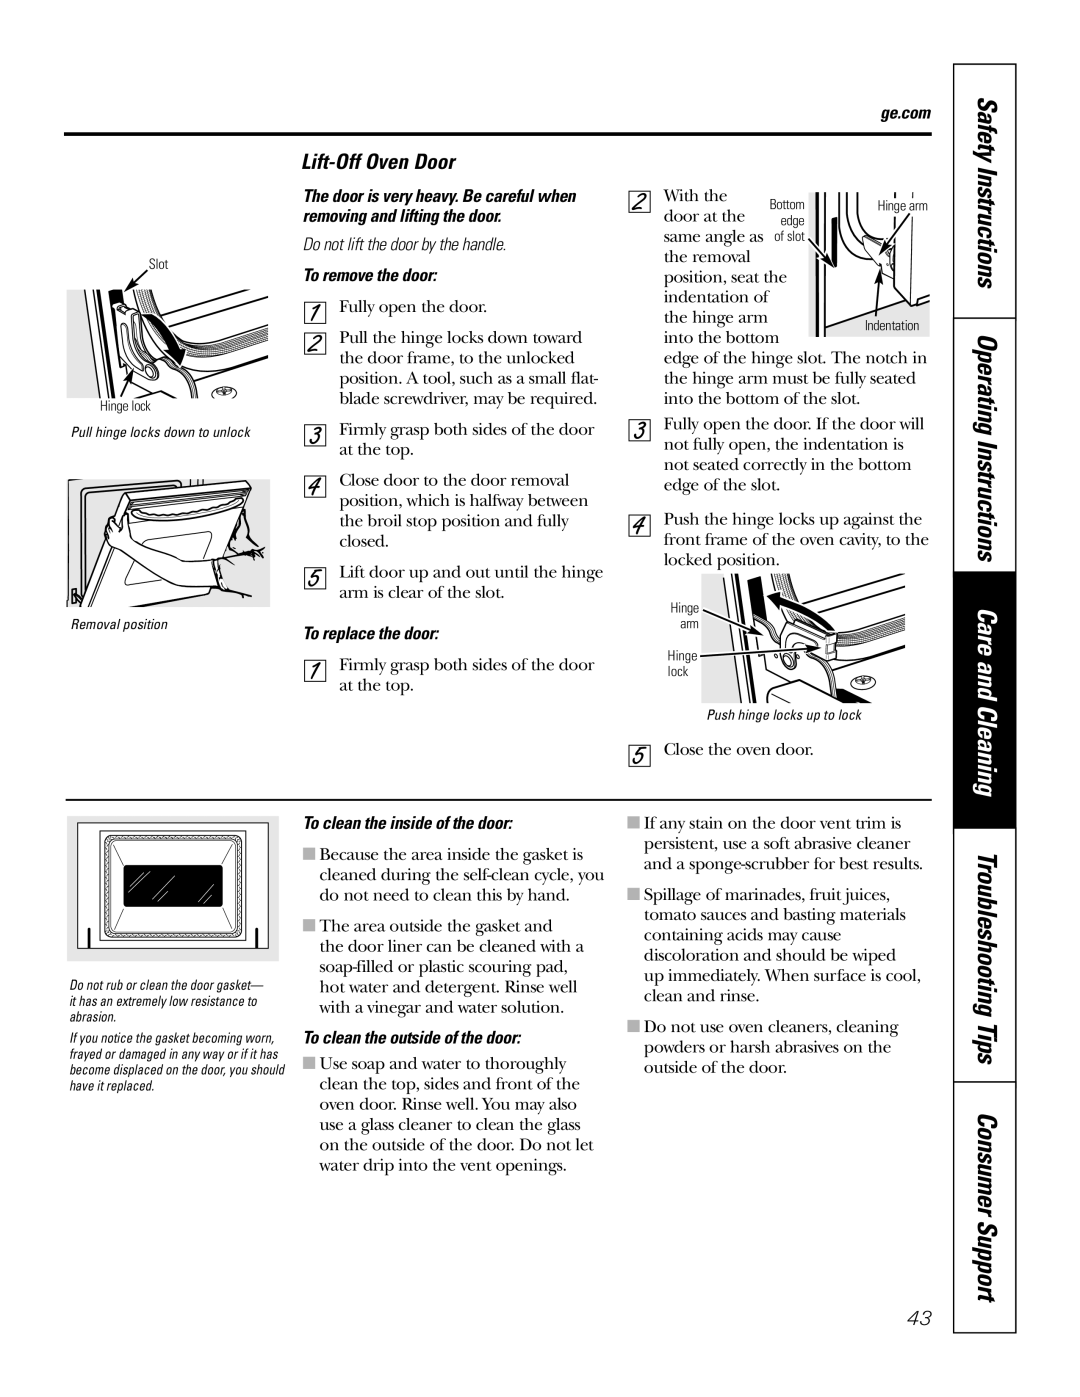 GE JT96530 Safety Instructions Operating Instructions Care and, Lift-Off Oven Door, Troubleshooting Tips Consumer Support 